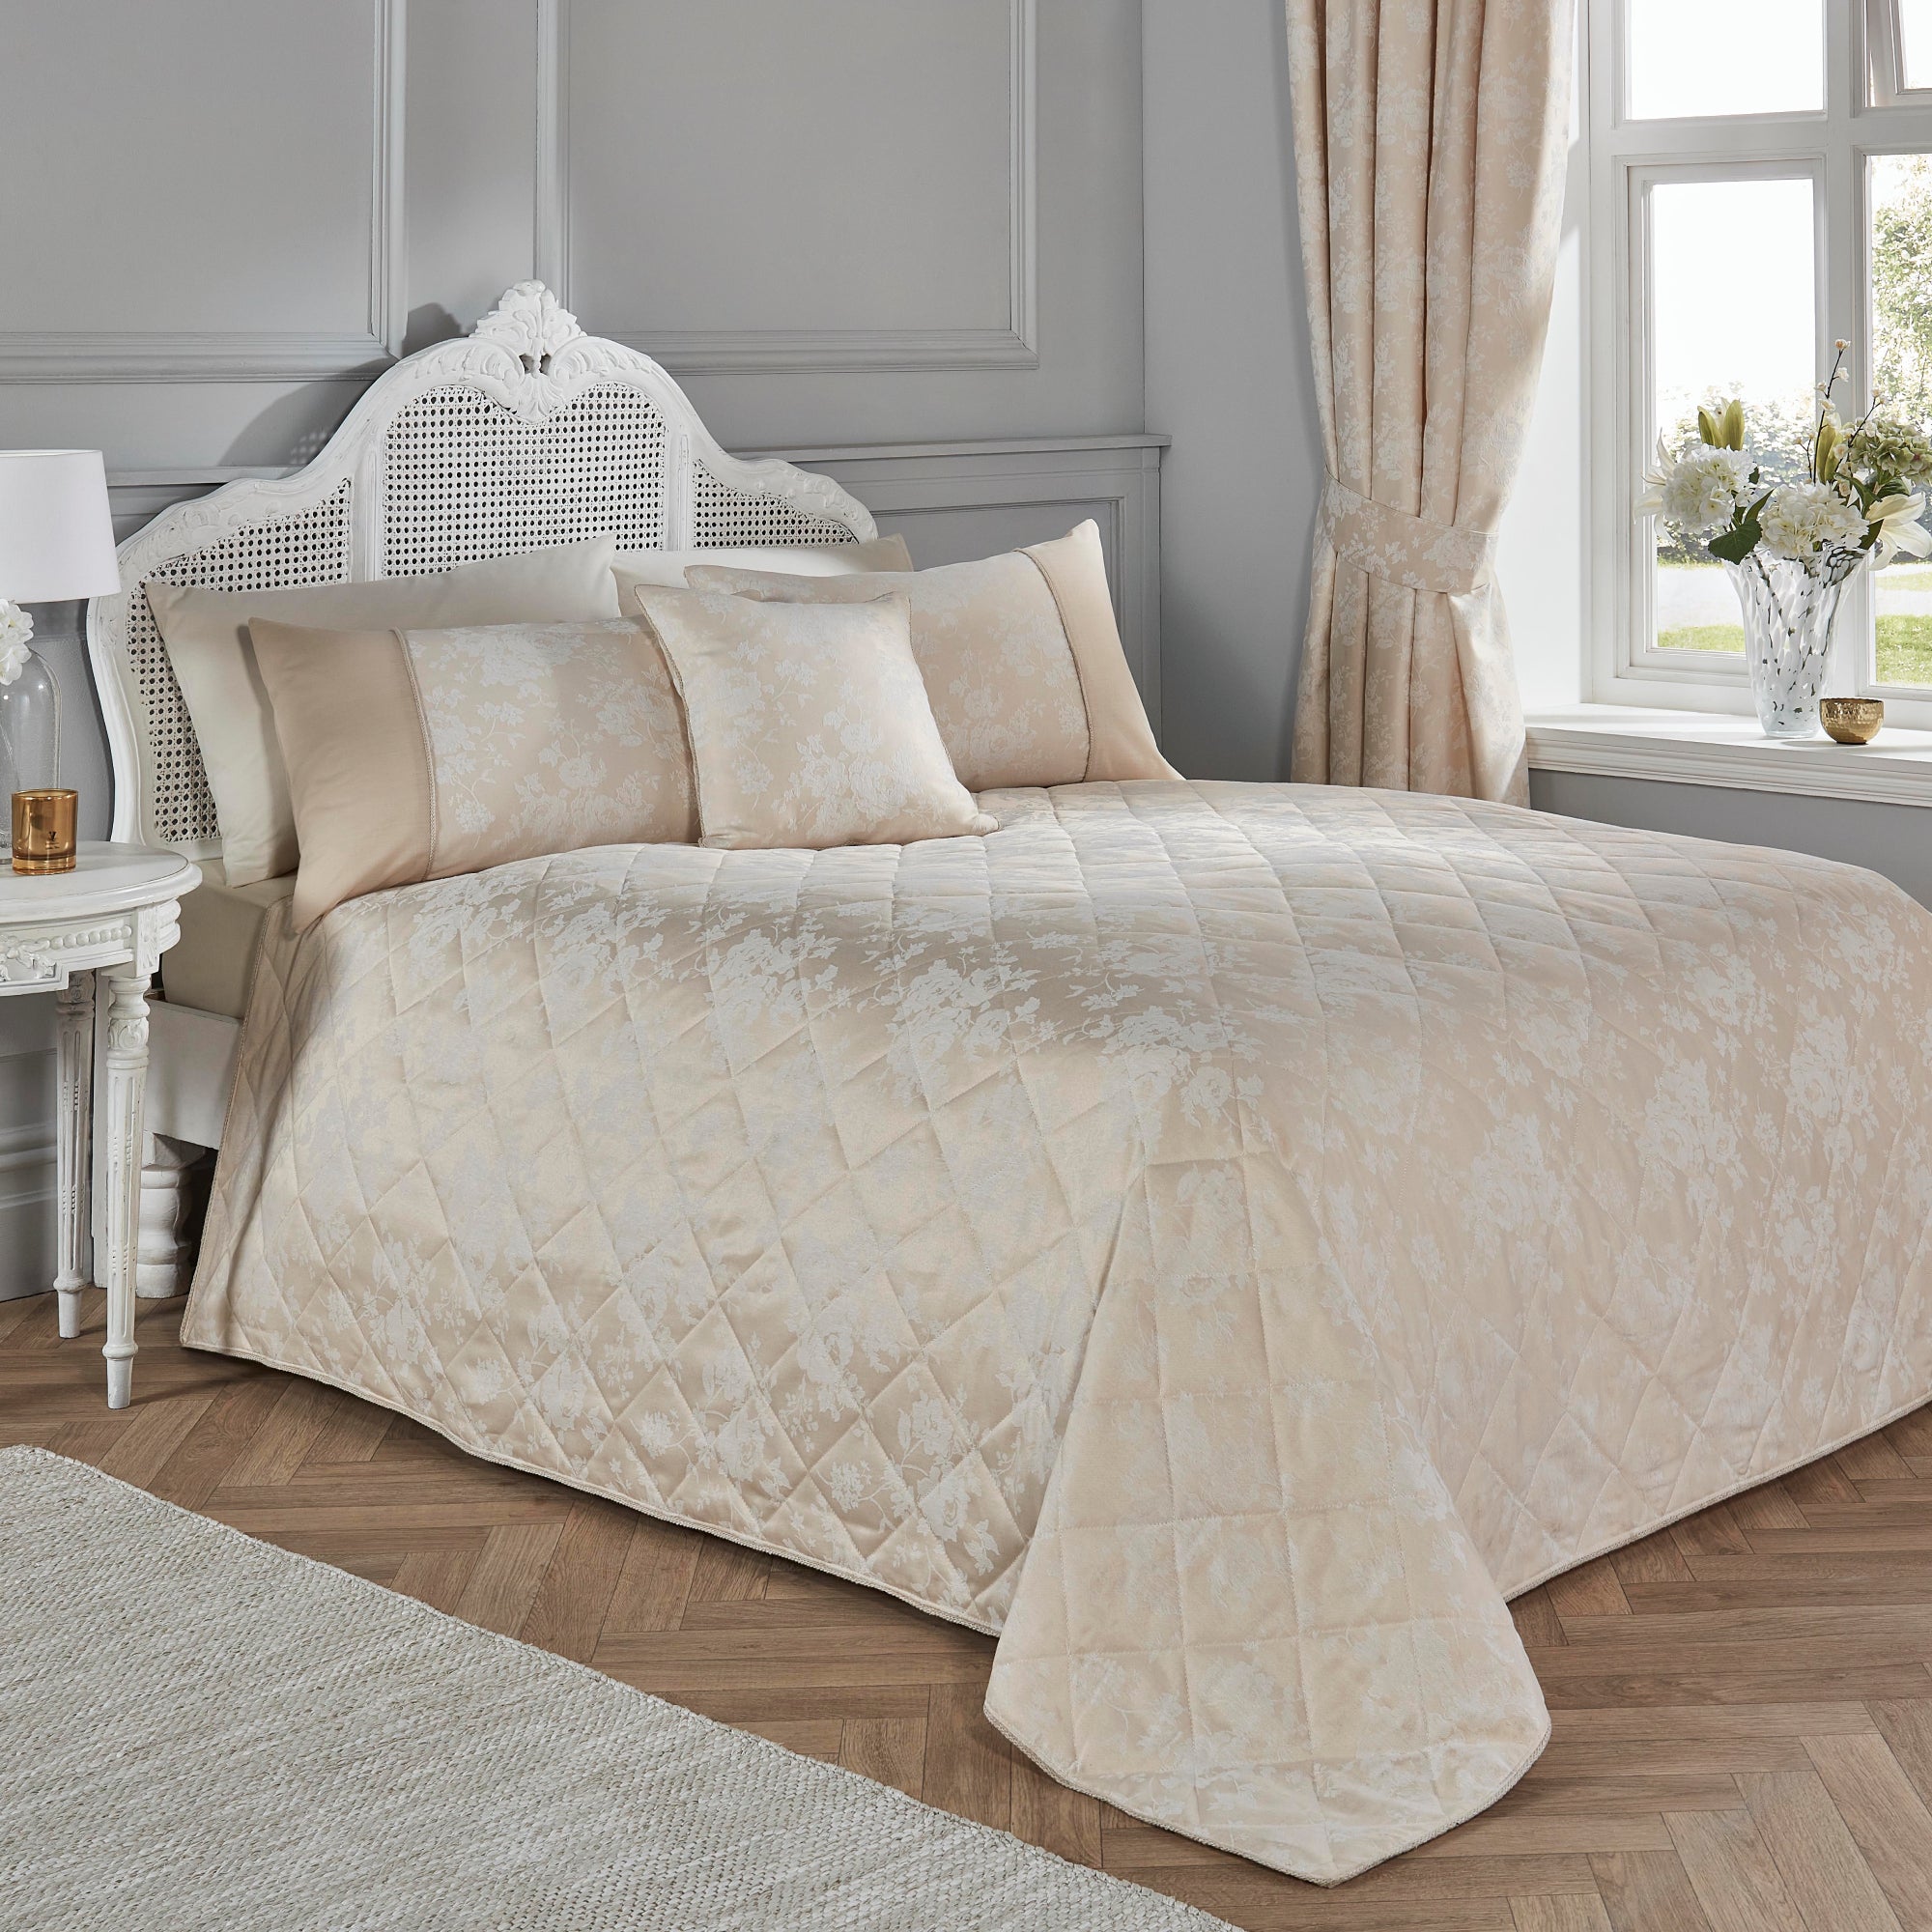 Bedspread Imelda by Dreams & Drapes Woven in Ivory